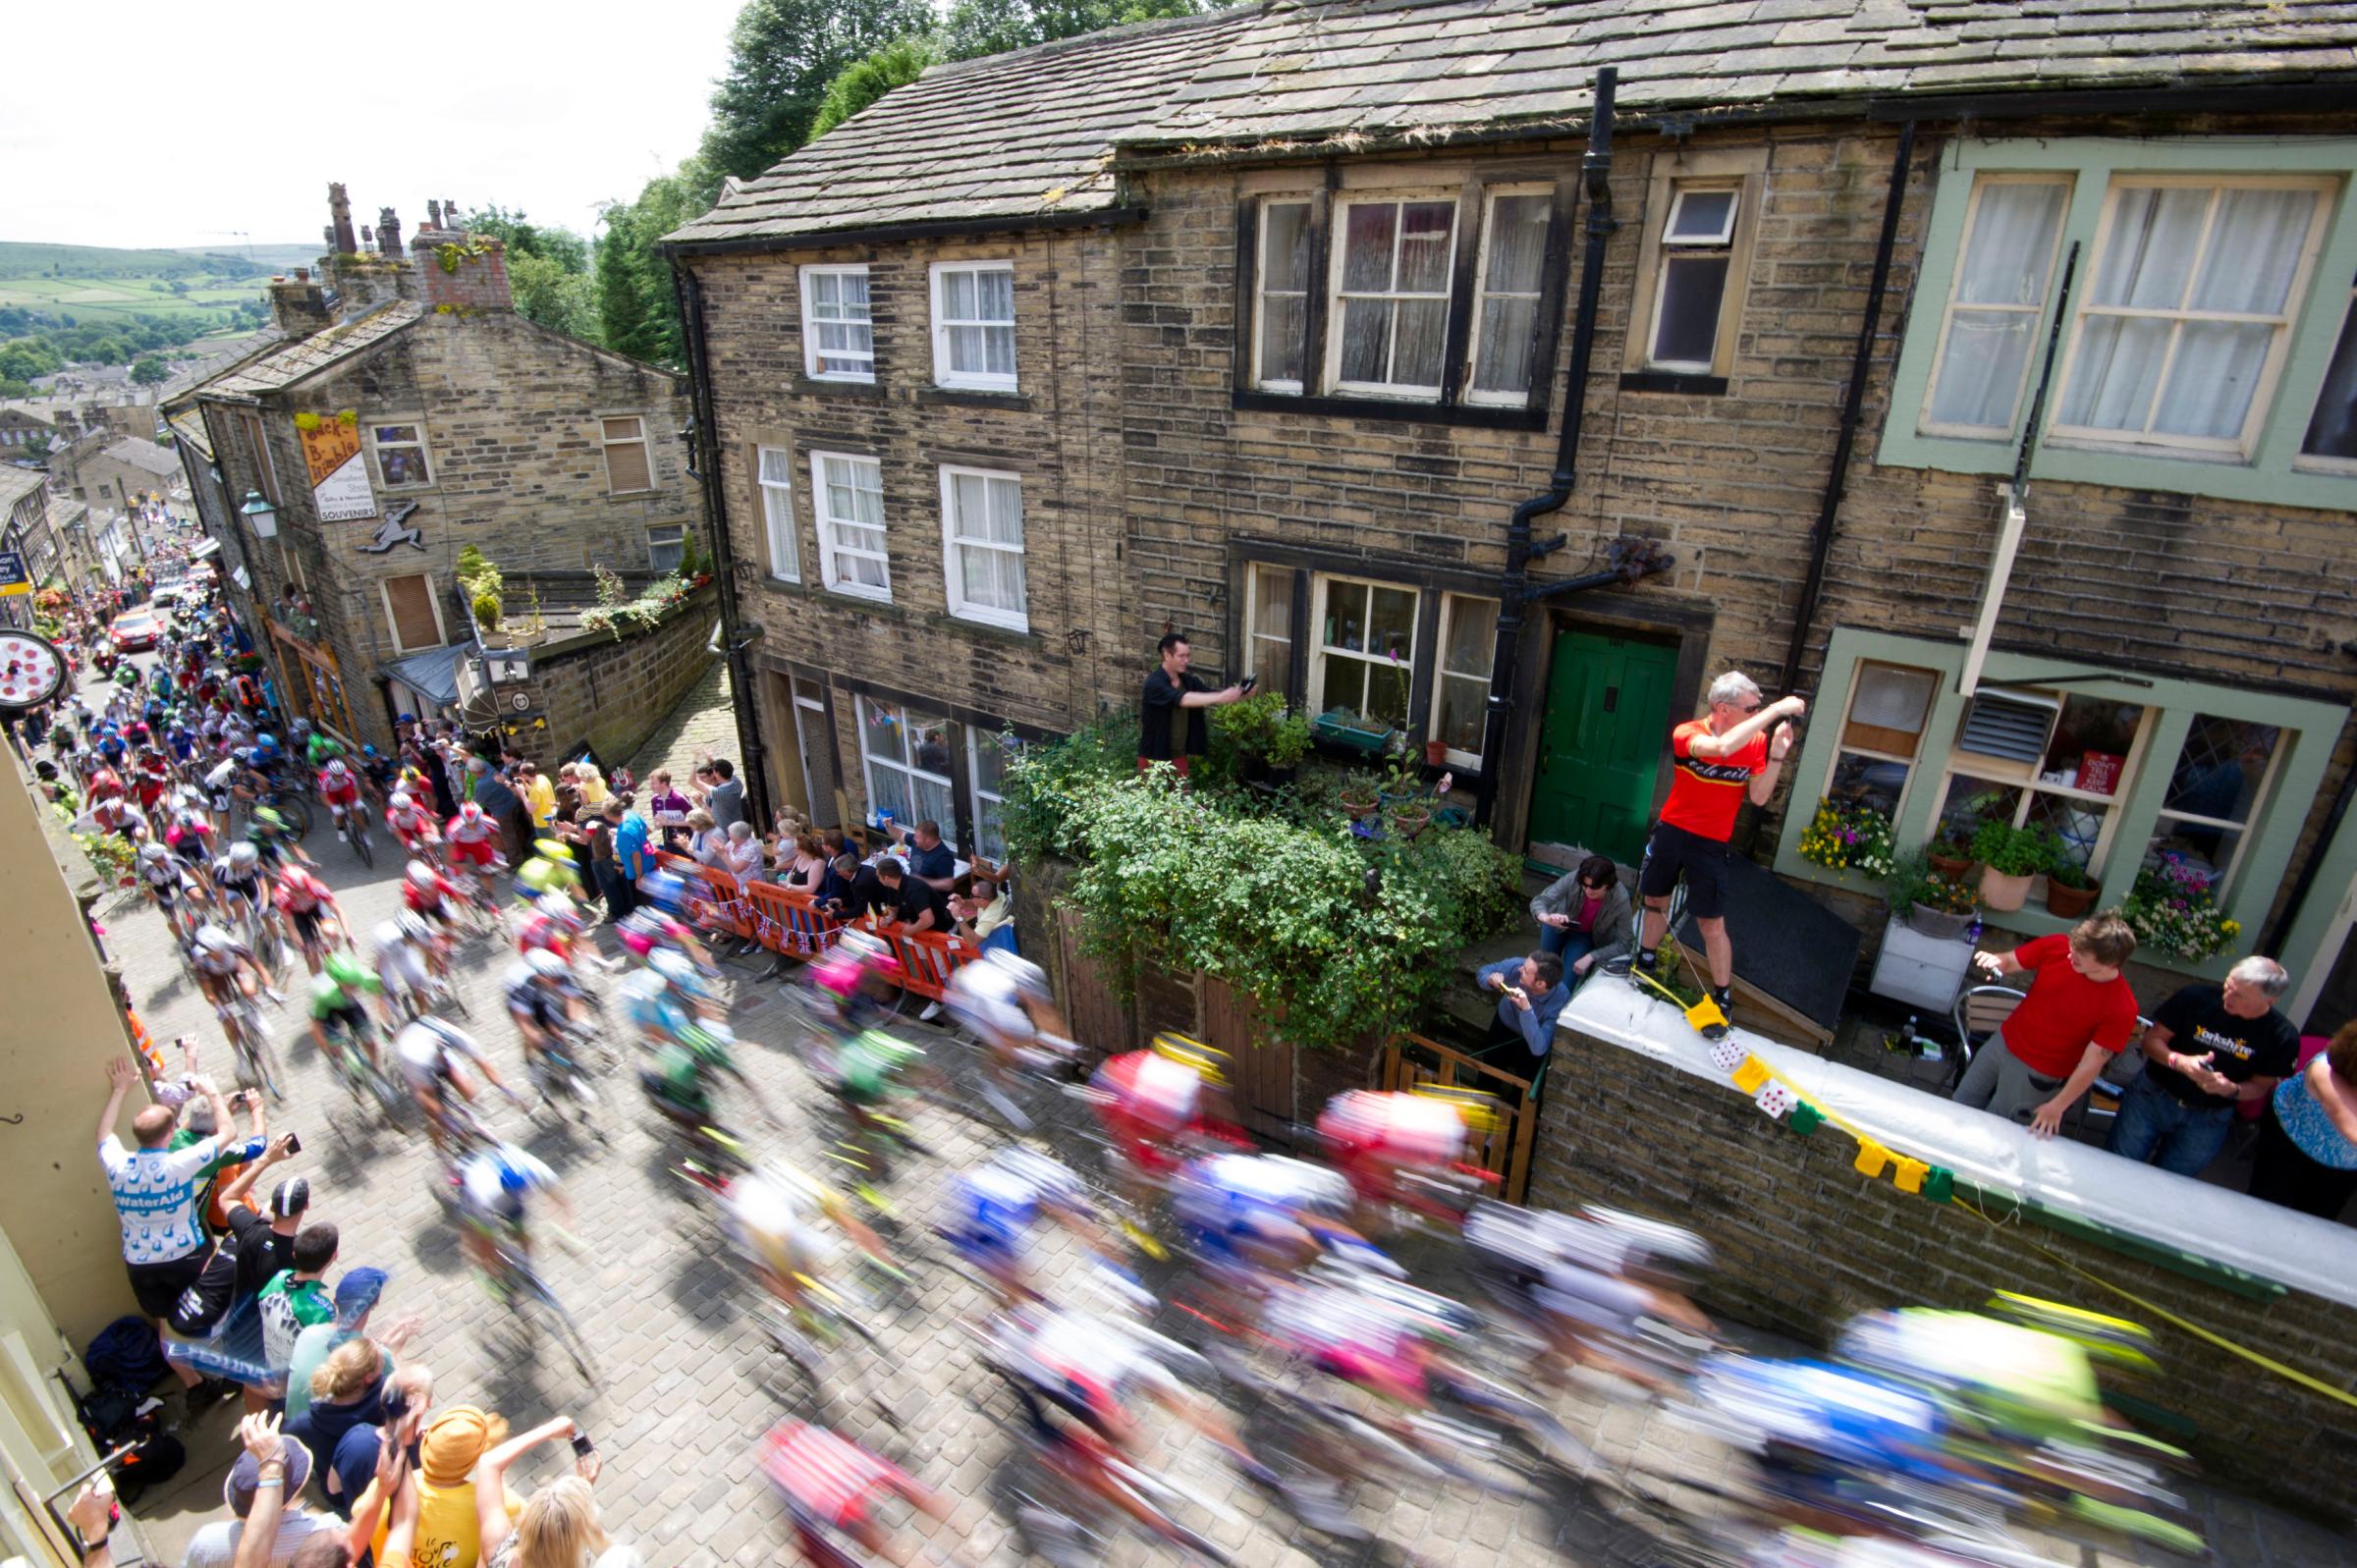 The peloton rides up Main Street as stage two of the Tour de France passes through Haworth, Yorkshire on July 6, 2014.